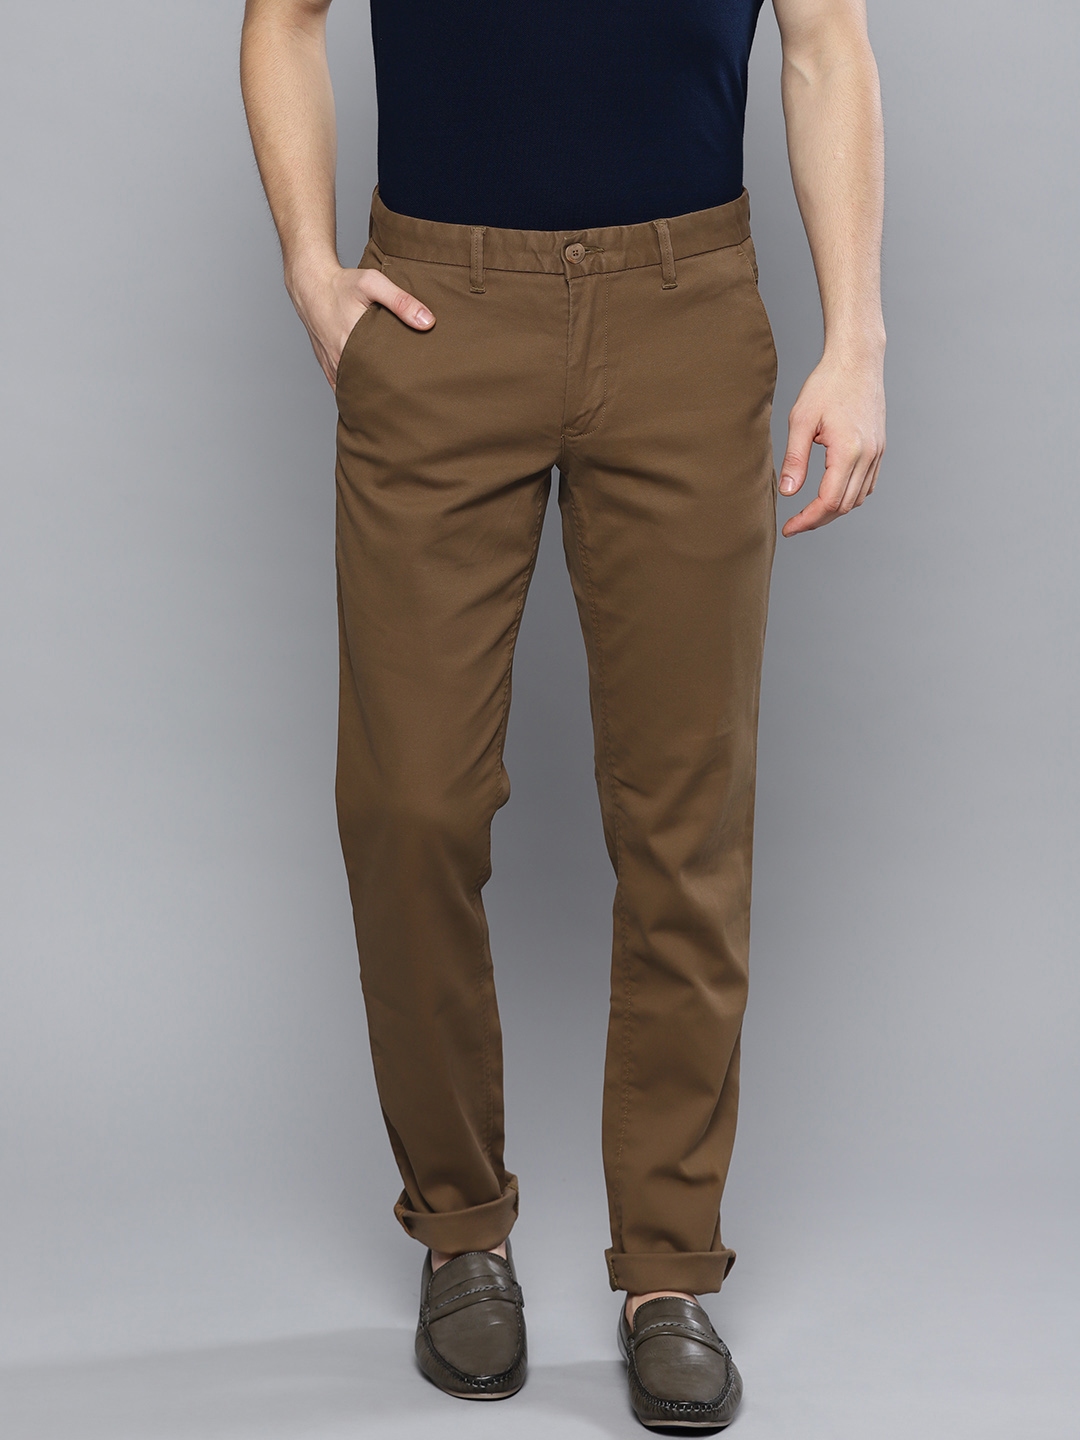 Buy Tan Solid Chinos - Trousers for Men 7932753 | Myntra